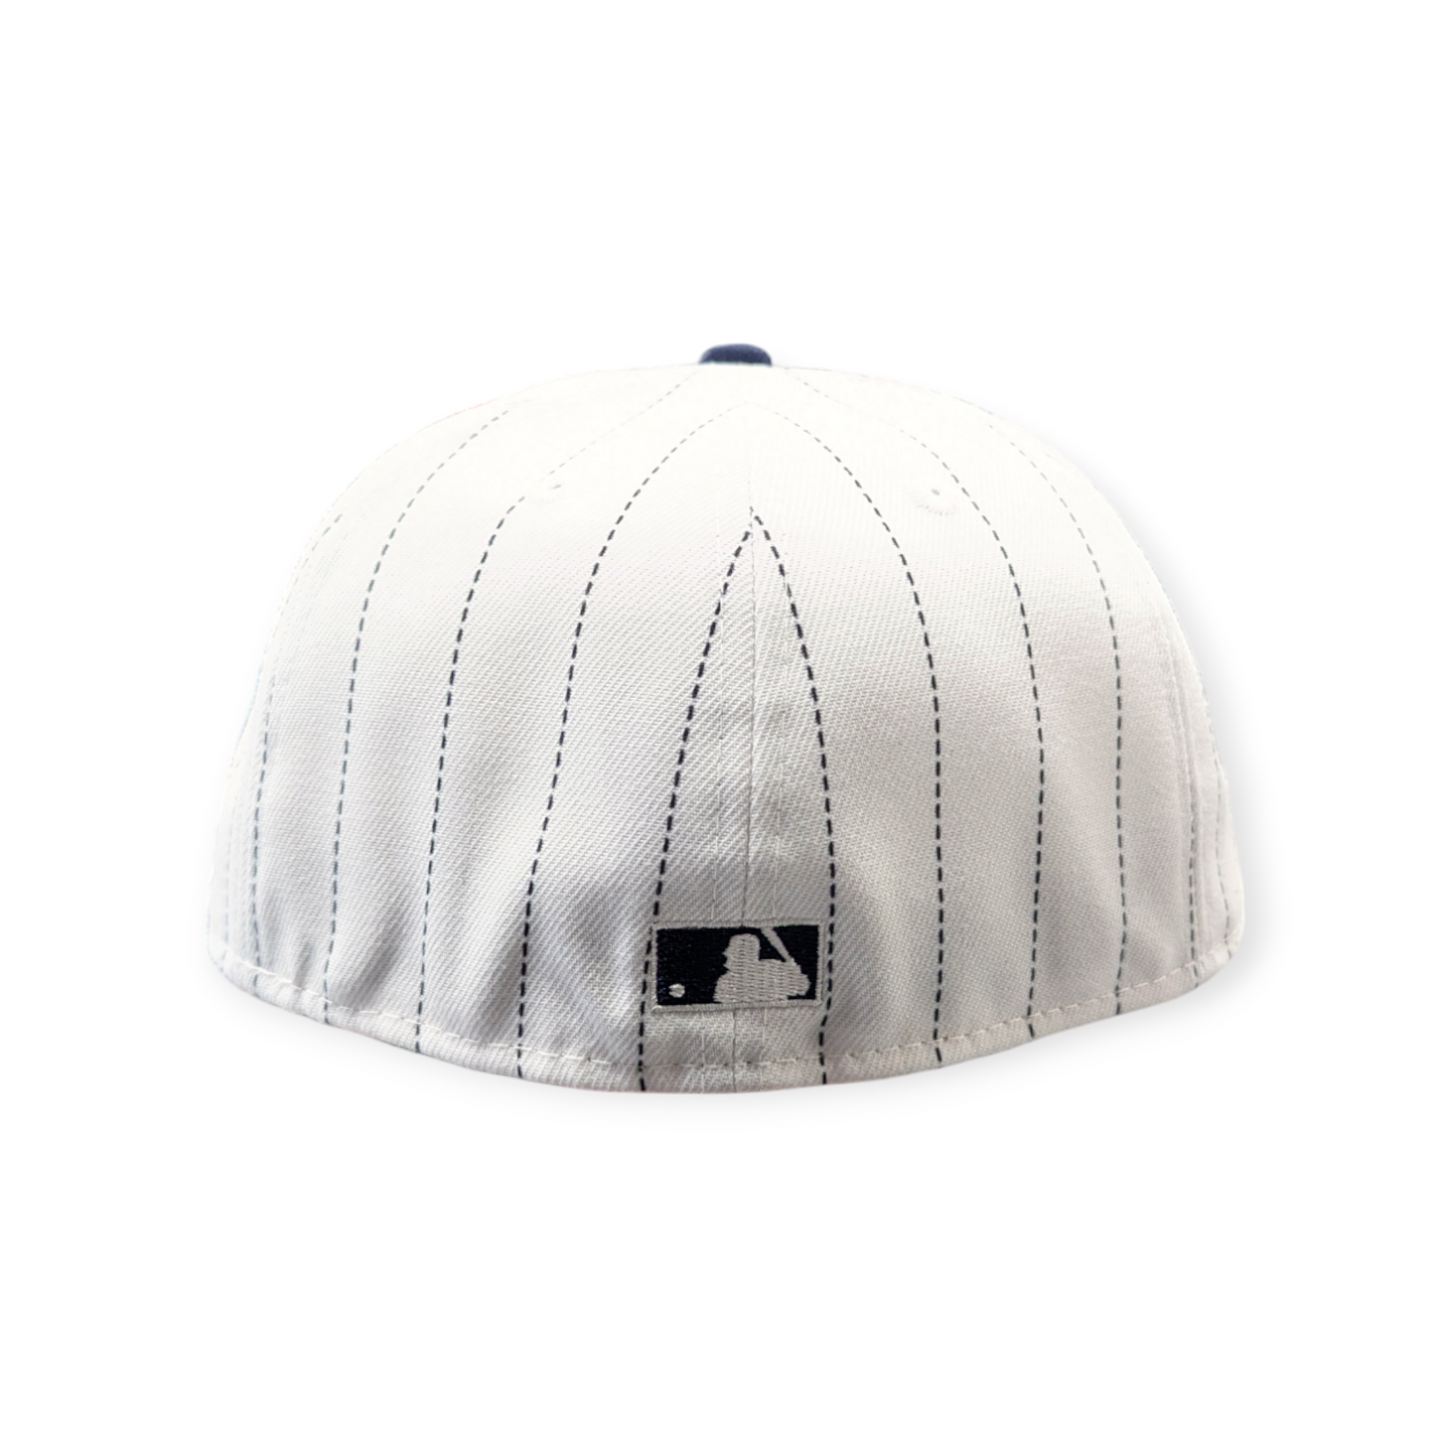 Chicago White Sox 1906 New Era Cooperstown Classics White/Navy Pinstripe 59FIFTY Fitted Hat